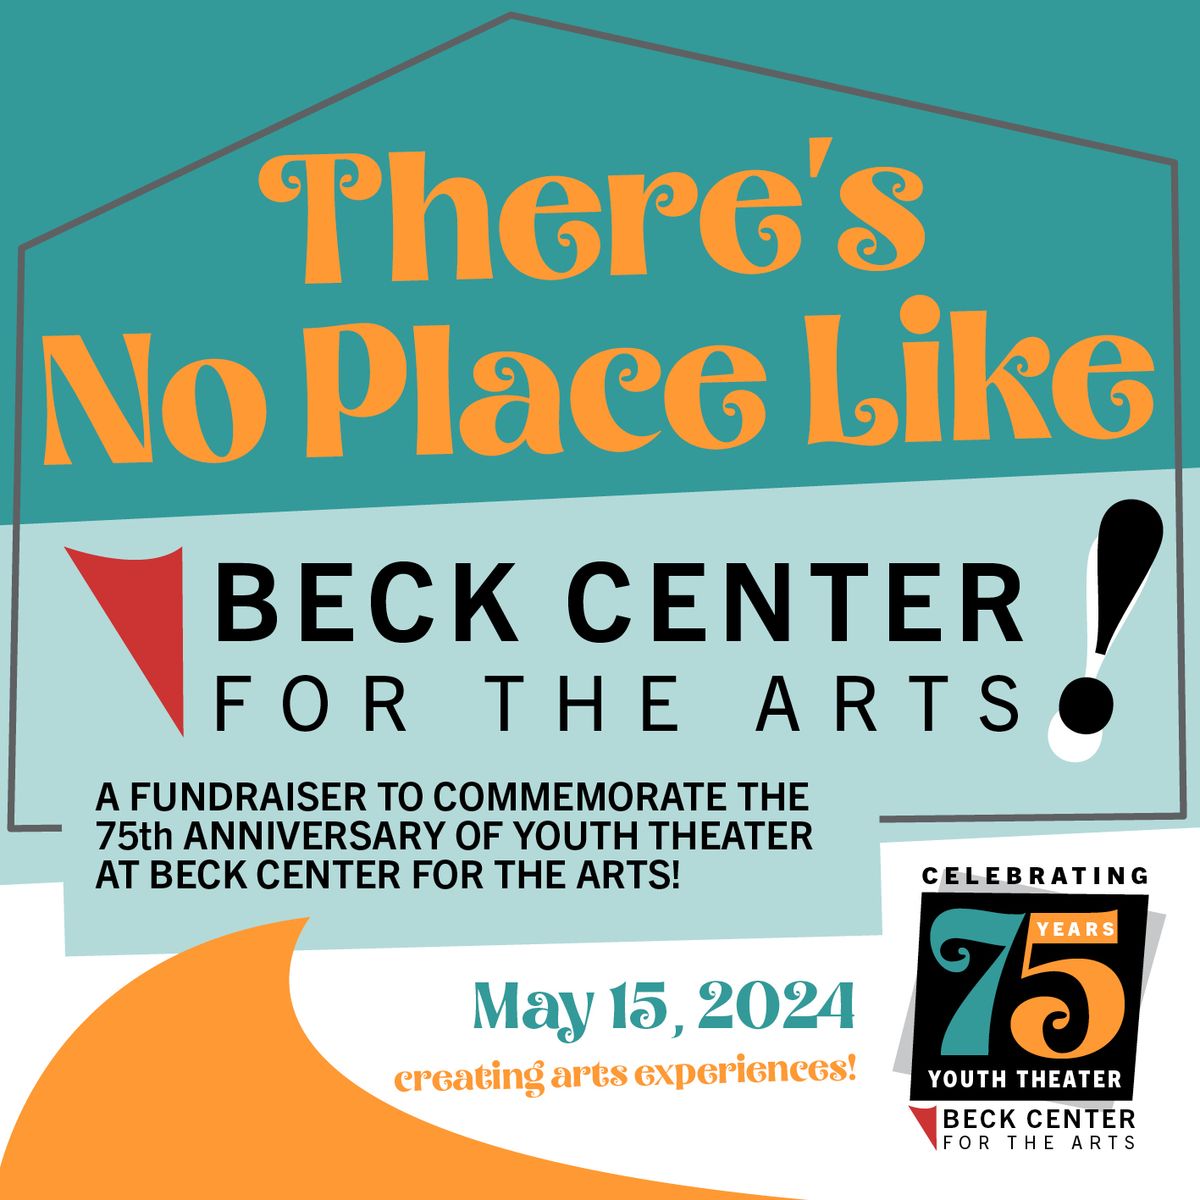 There's No Place Like Beck Center! A Fundraiser to Commemorate the Youth Theater 75th Anniversary